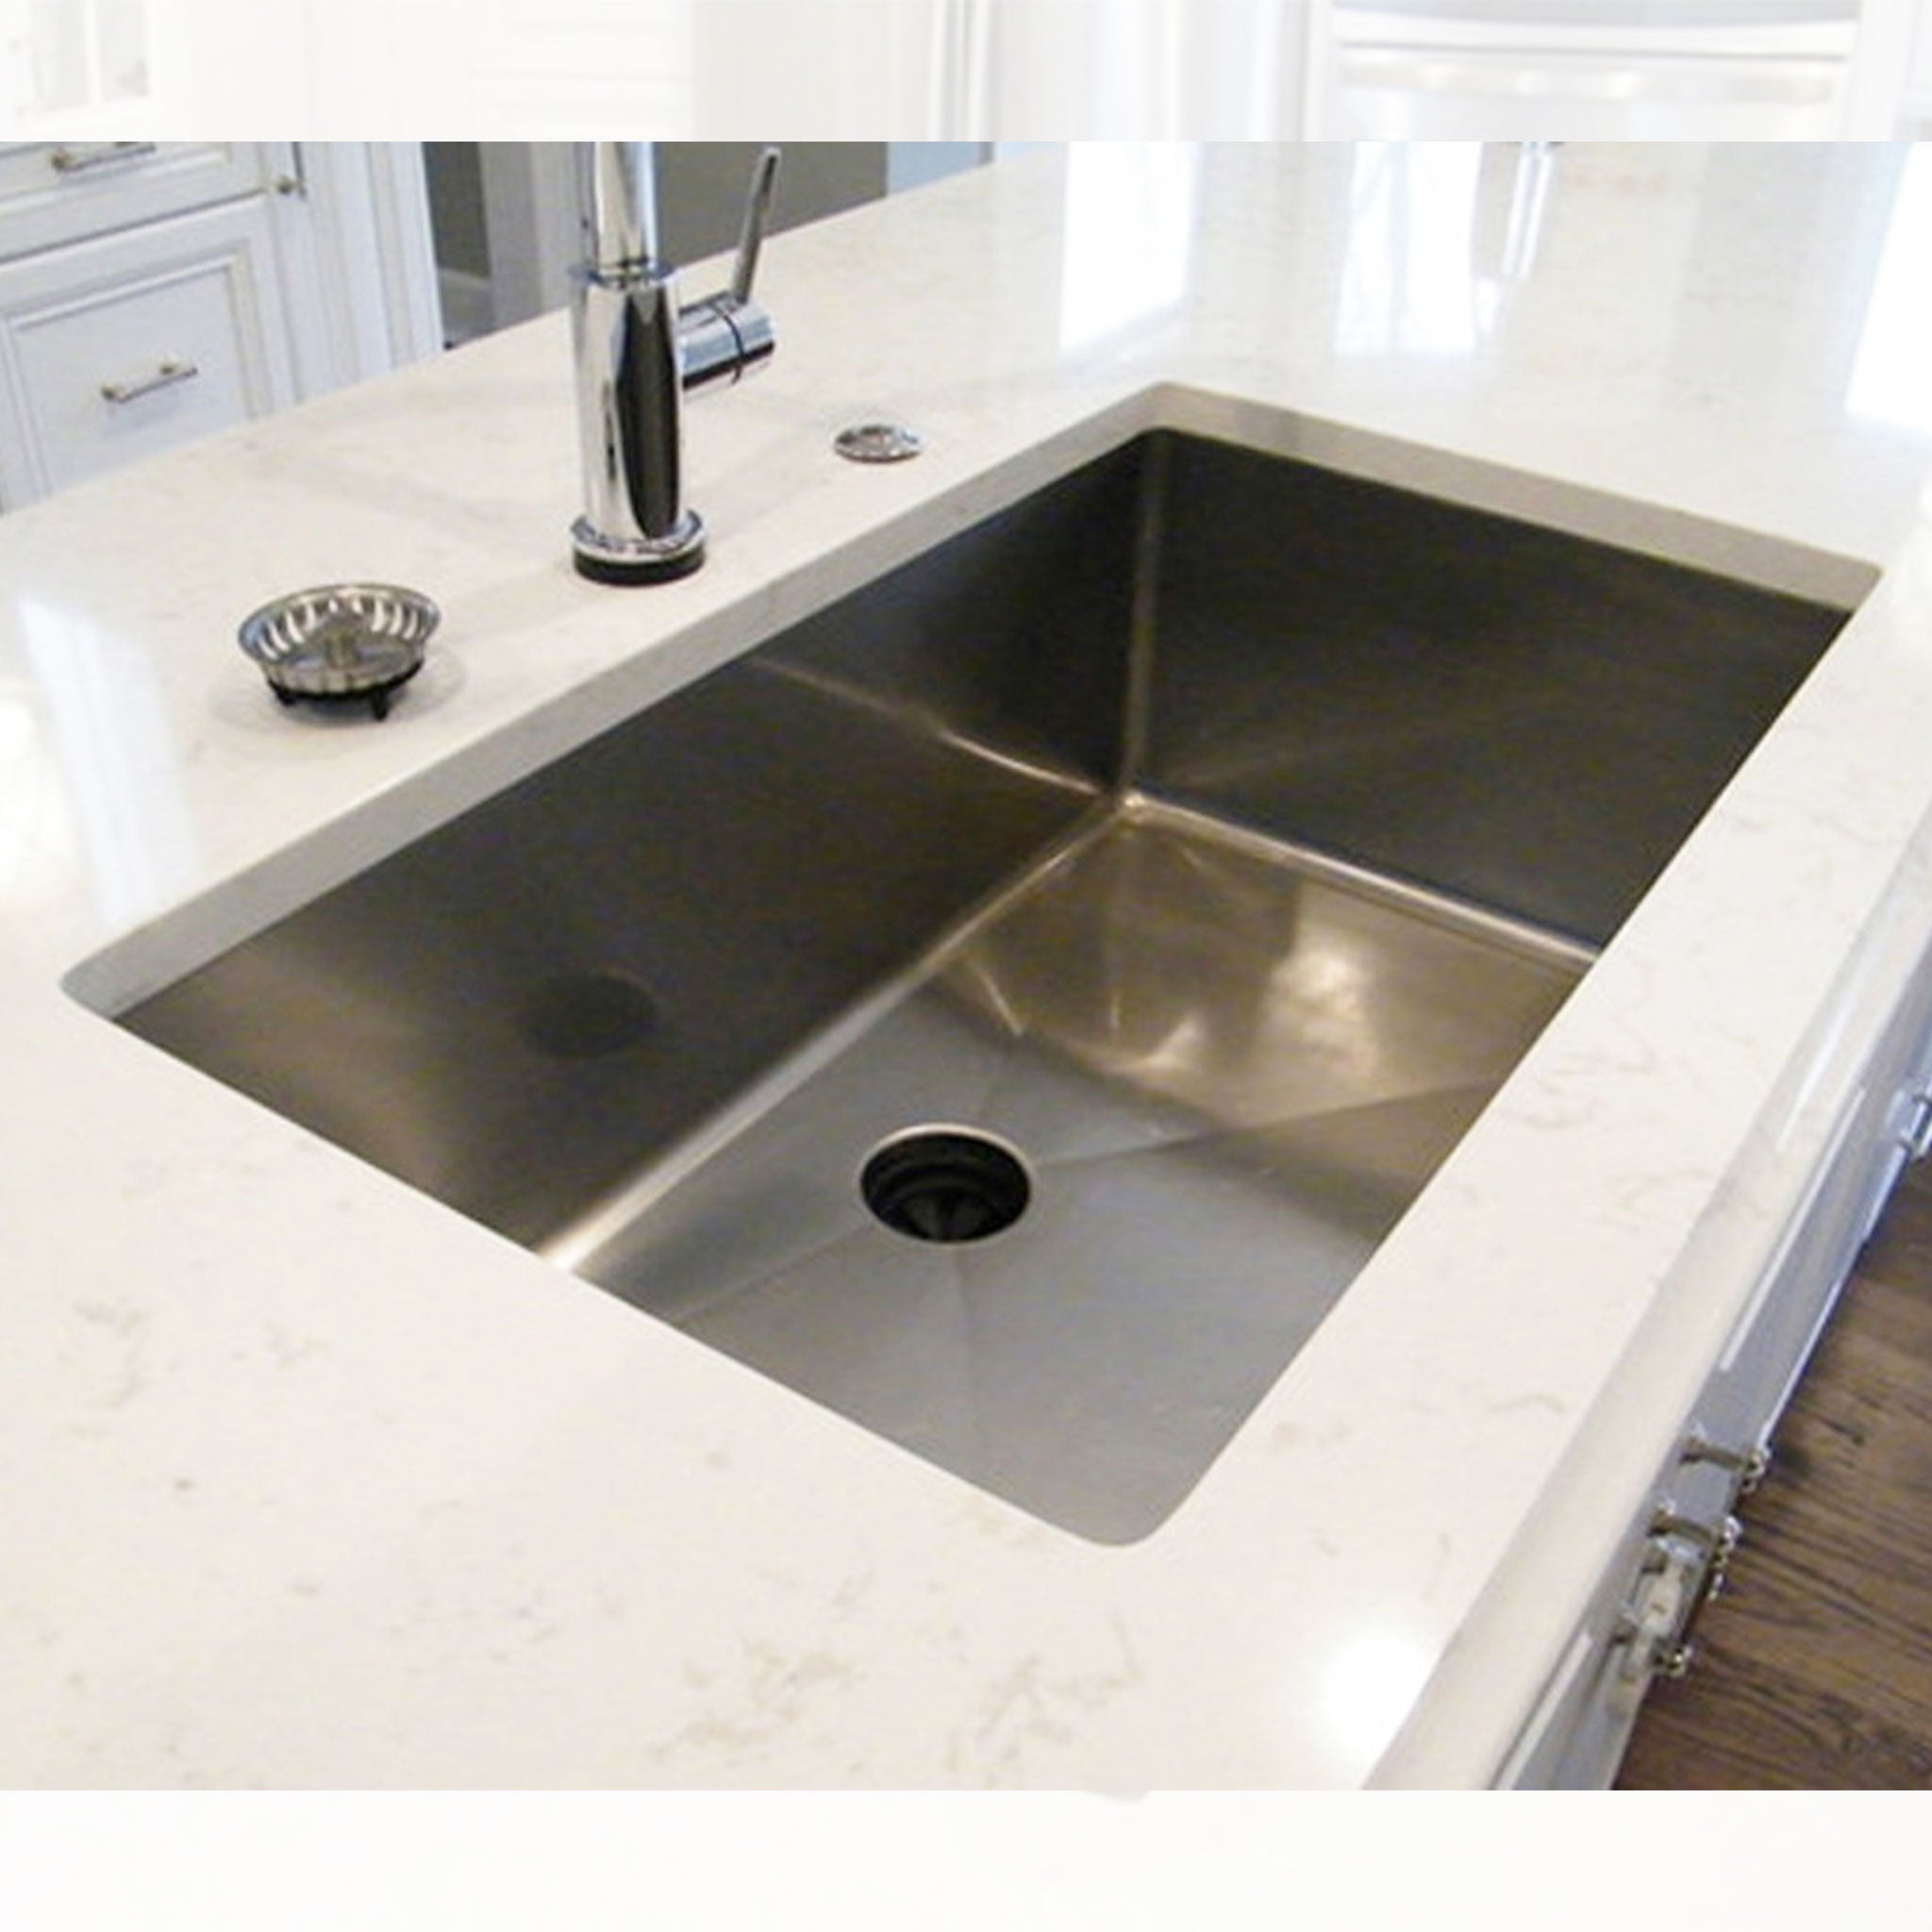 Real photos of client’s install of a 32” classic sink from Create Good Sinks with a seamless drain.